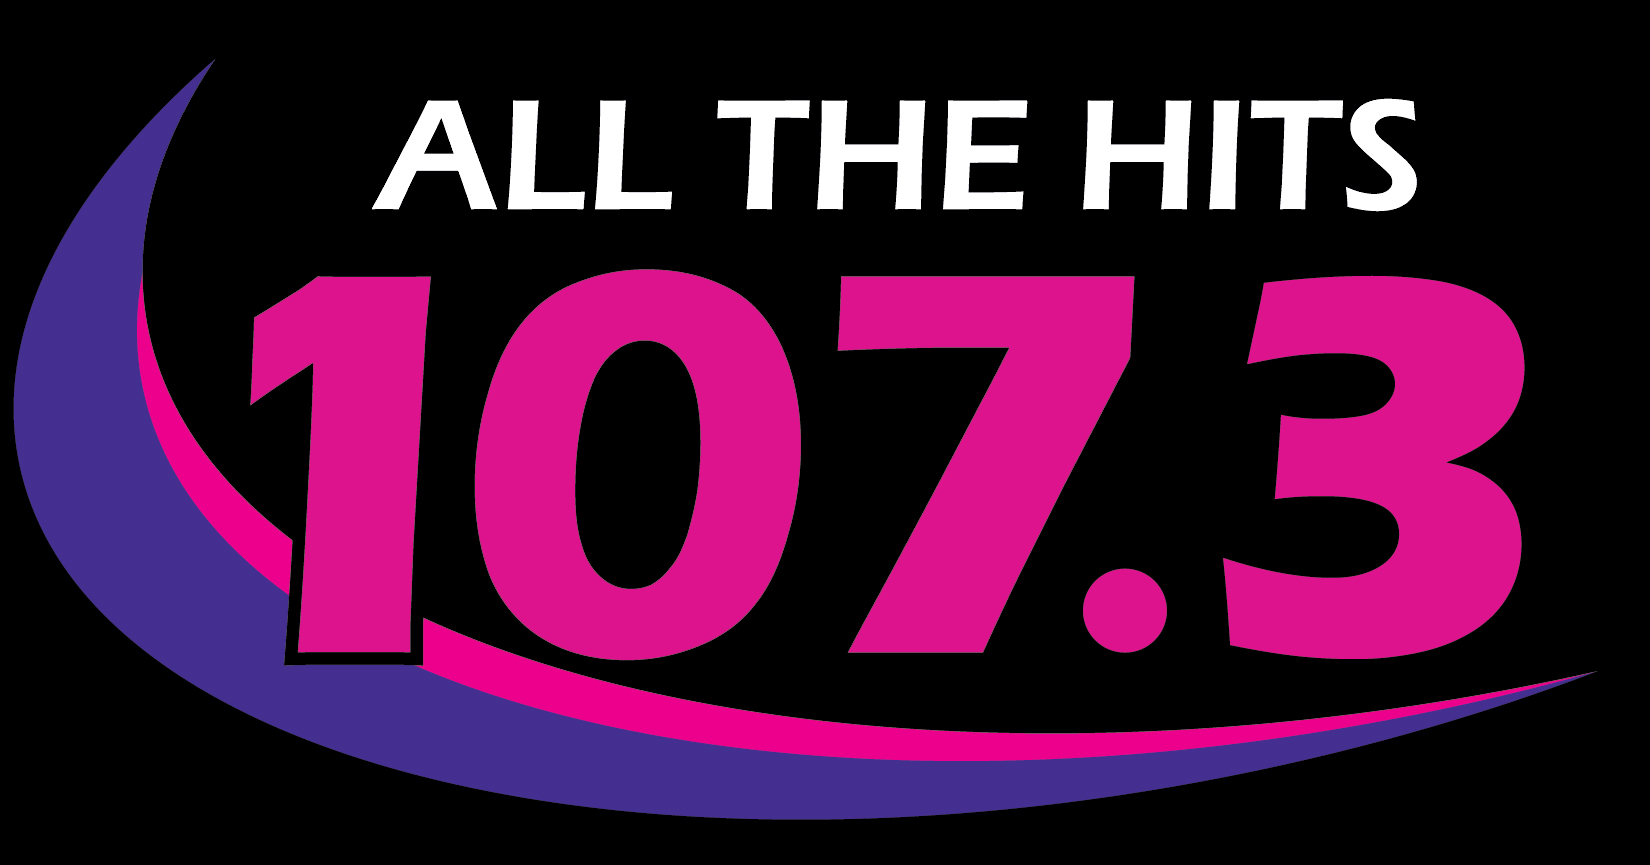 DCW 107.3 ALL THE HITS